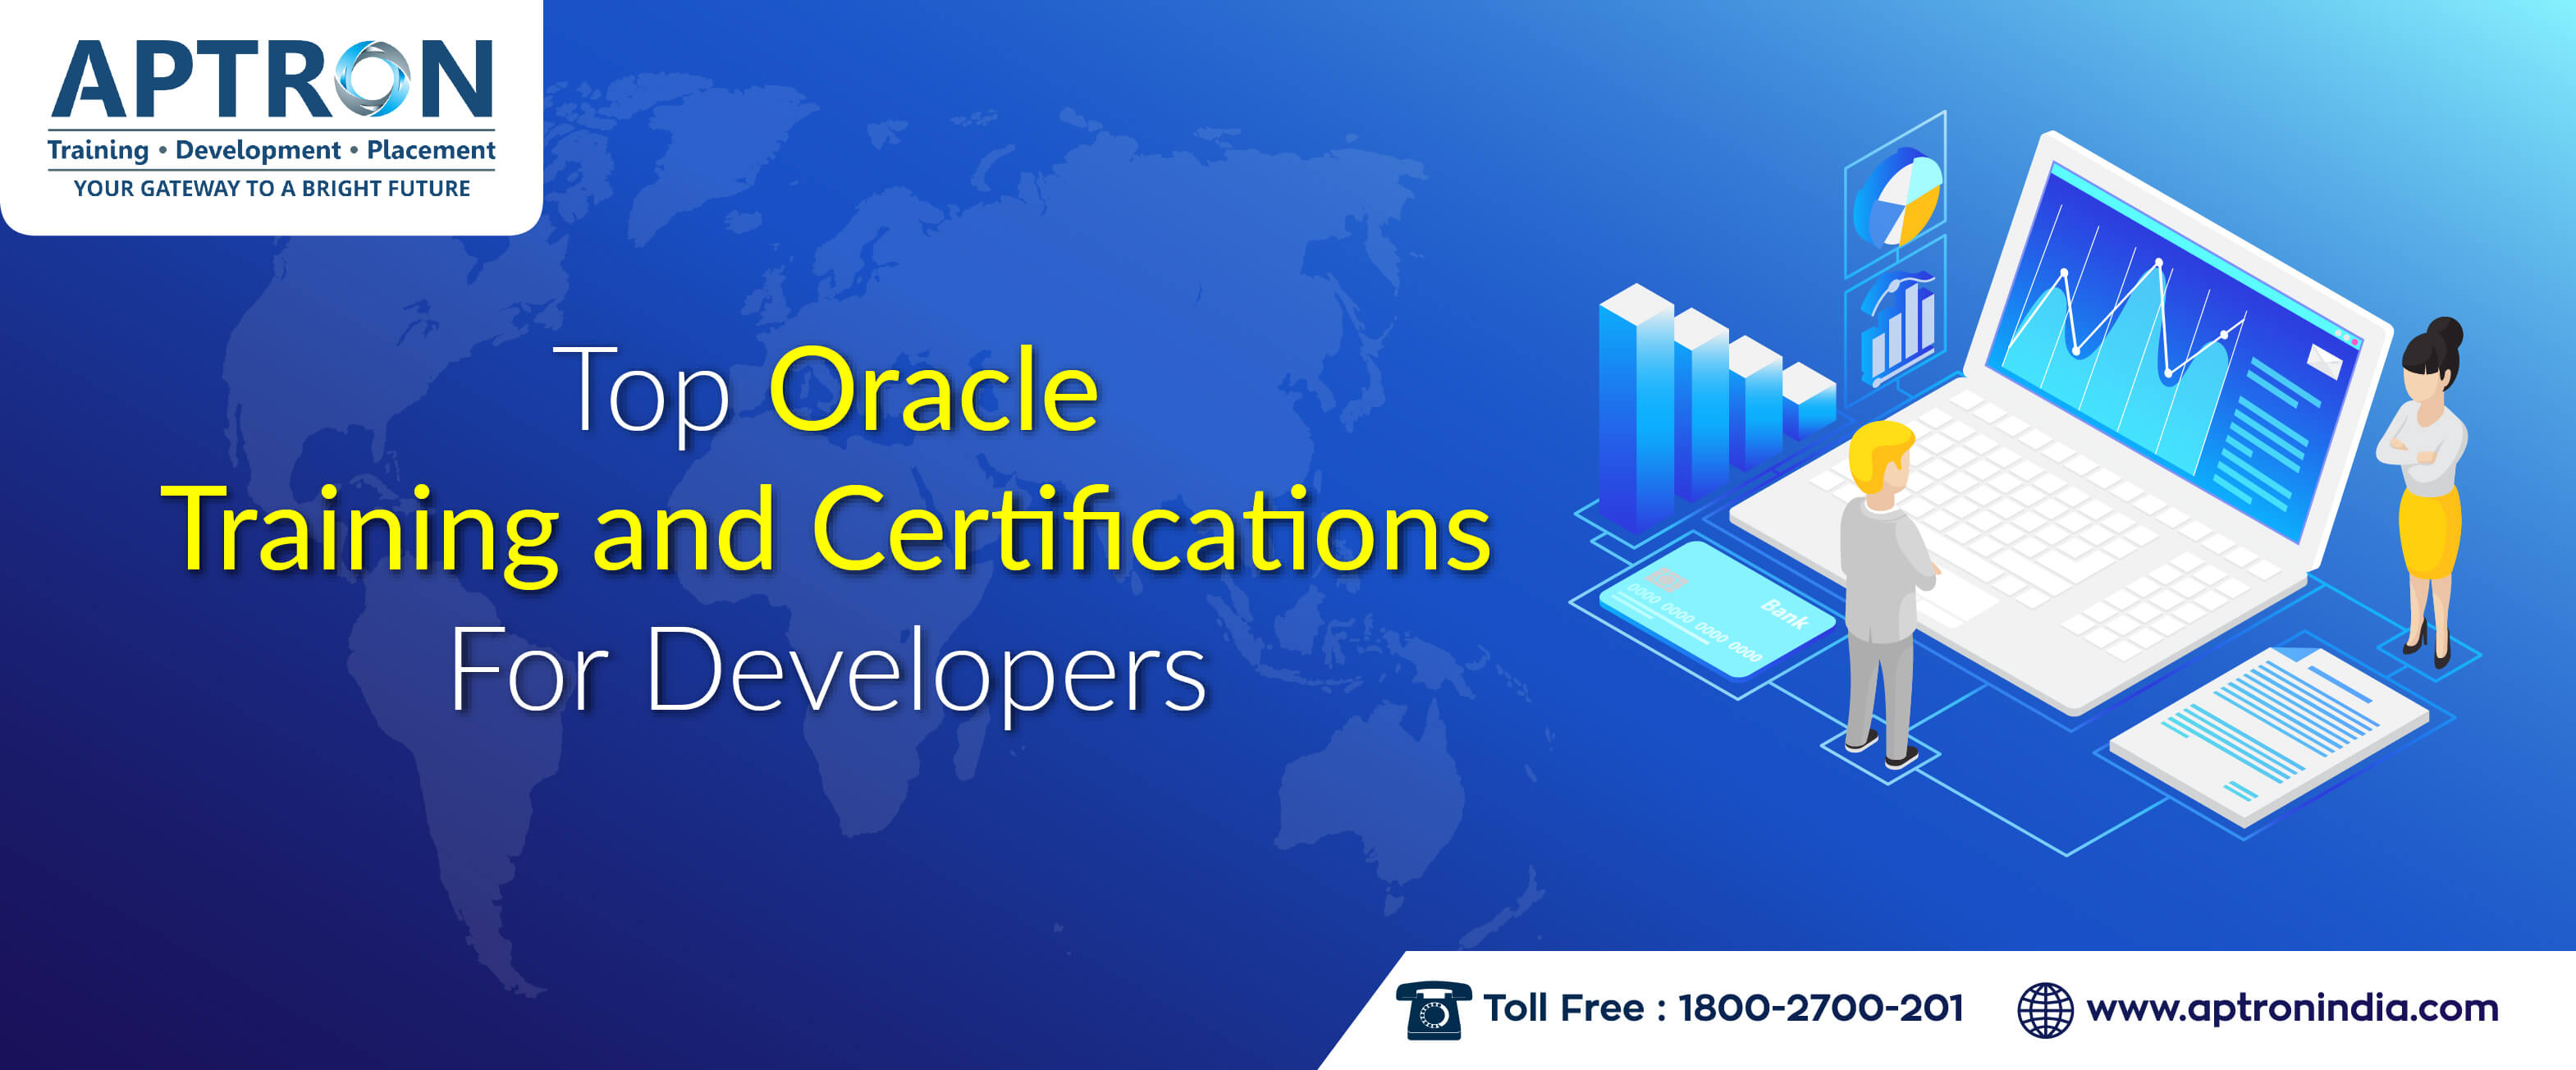 Top Oracle Training and Certifications for Developers